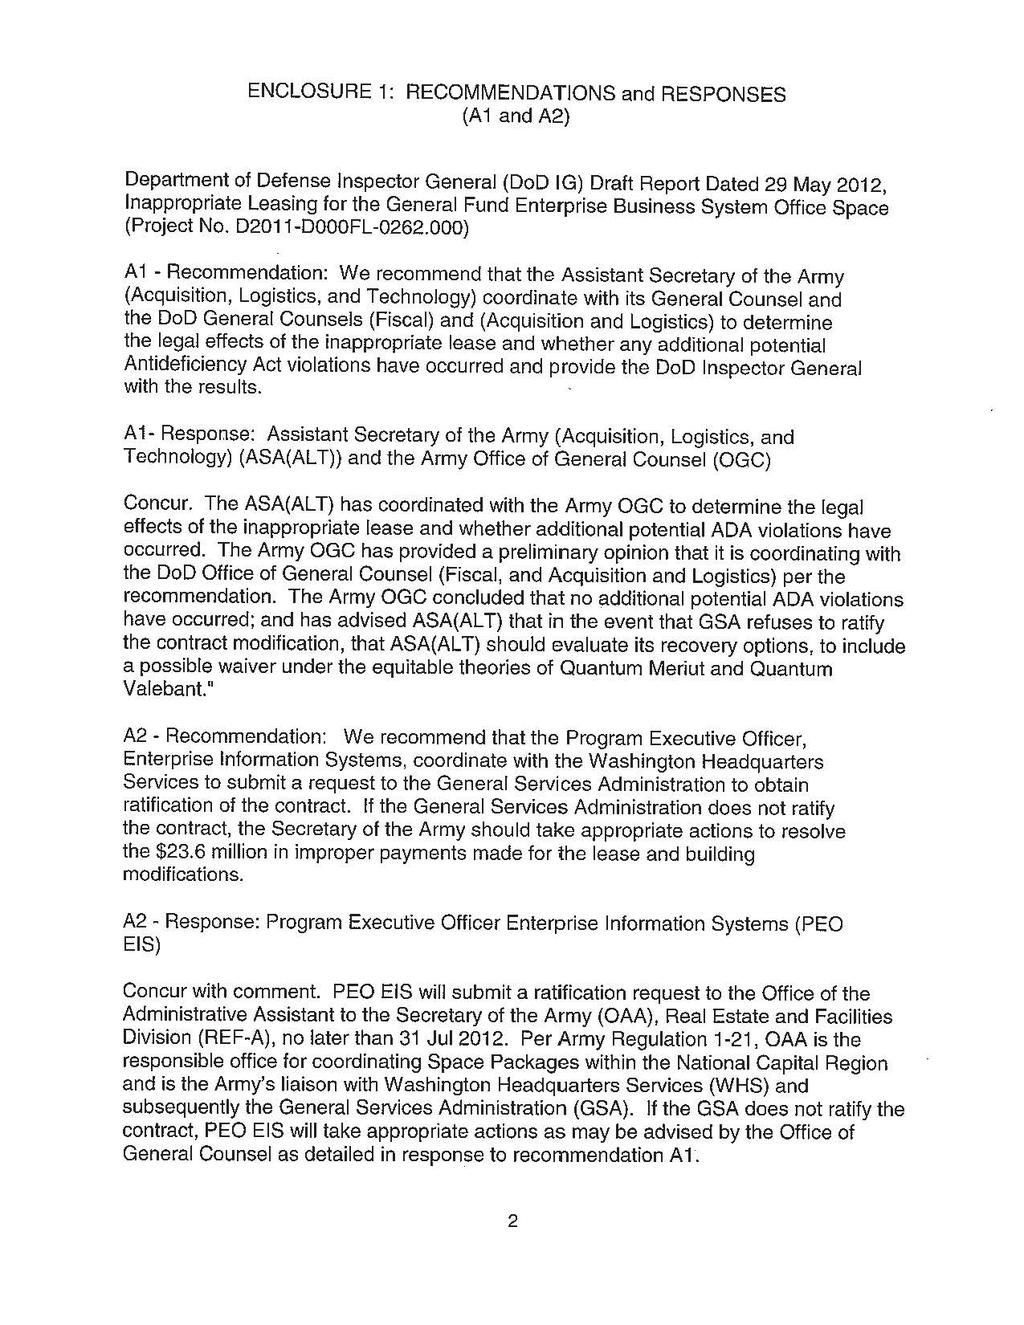 ENCLOSURE 1: RECOMMENDATIONS and RESPONSES (Ai and A2) Department of Defense Inspector General (DoD JG) Draft Report Dated 29 May 2012, Inappropriate Leasing for the General Fund Enterprise Business